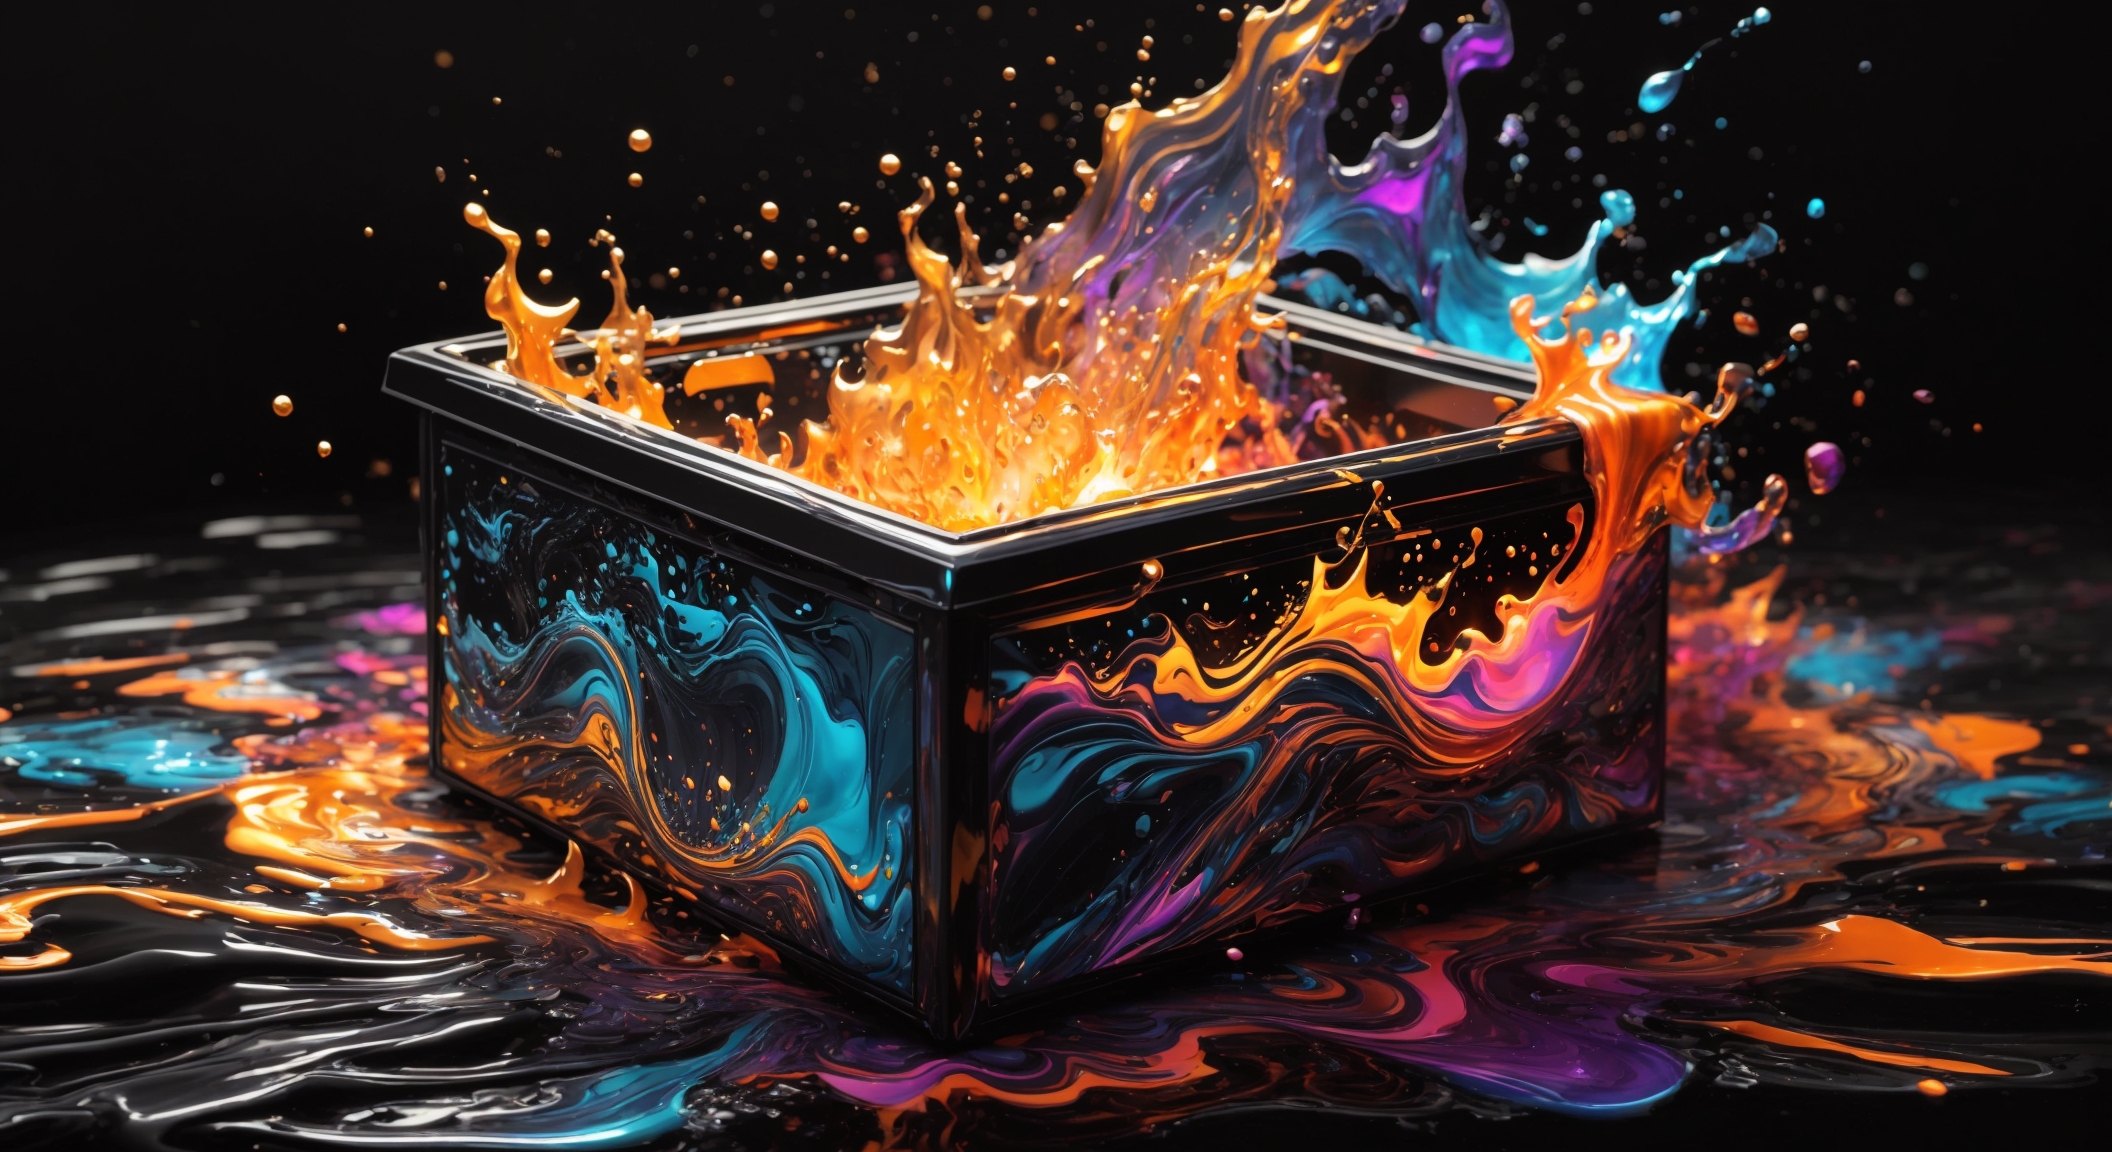 Magical black box, serene, hyper-detailed, t-shirt design, line art, black background, ultra-detailed art, beautiful, water splash, color art, fire and ice, splatter, black ink, liquid melt, dreamy, glowing, Glamour, Glimmer,shadows,Oil On Canvas, Brush Strokes, Smooth, Ultra High Definition, 8k, Unreal Engine 5, Gs Studio, Ultra Sharp Focus, Intricate Artwork Masterpiece, Golden Ratio, High Detail, Vibrant, Production Cinematic Character Render, Ultra High Quality Model, ultra high definition, 30 megapixels, sharp focus, front camera, monovisions, perfect contrast, high sharpness, art quality by GIlSam-paio, octane rendering, 8k, ultra high definition, Studio Gs Cinema HD